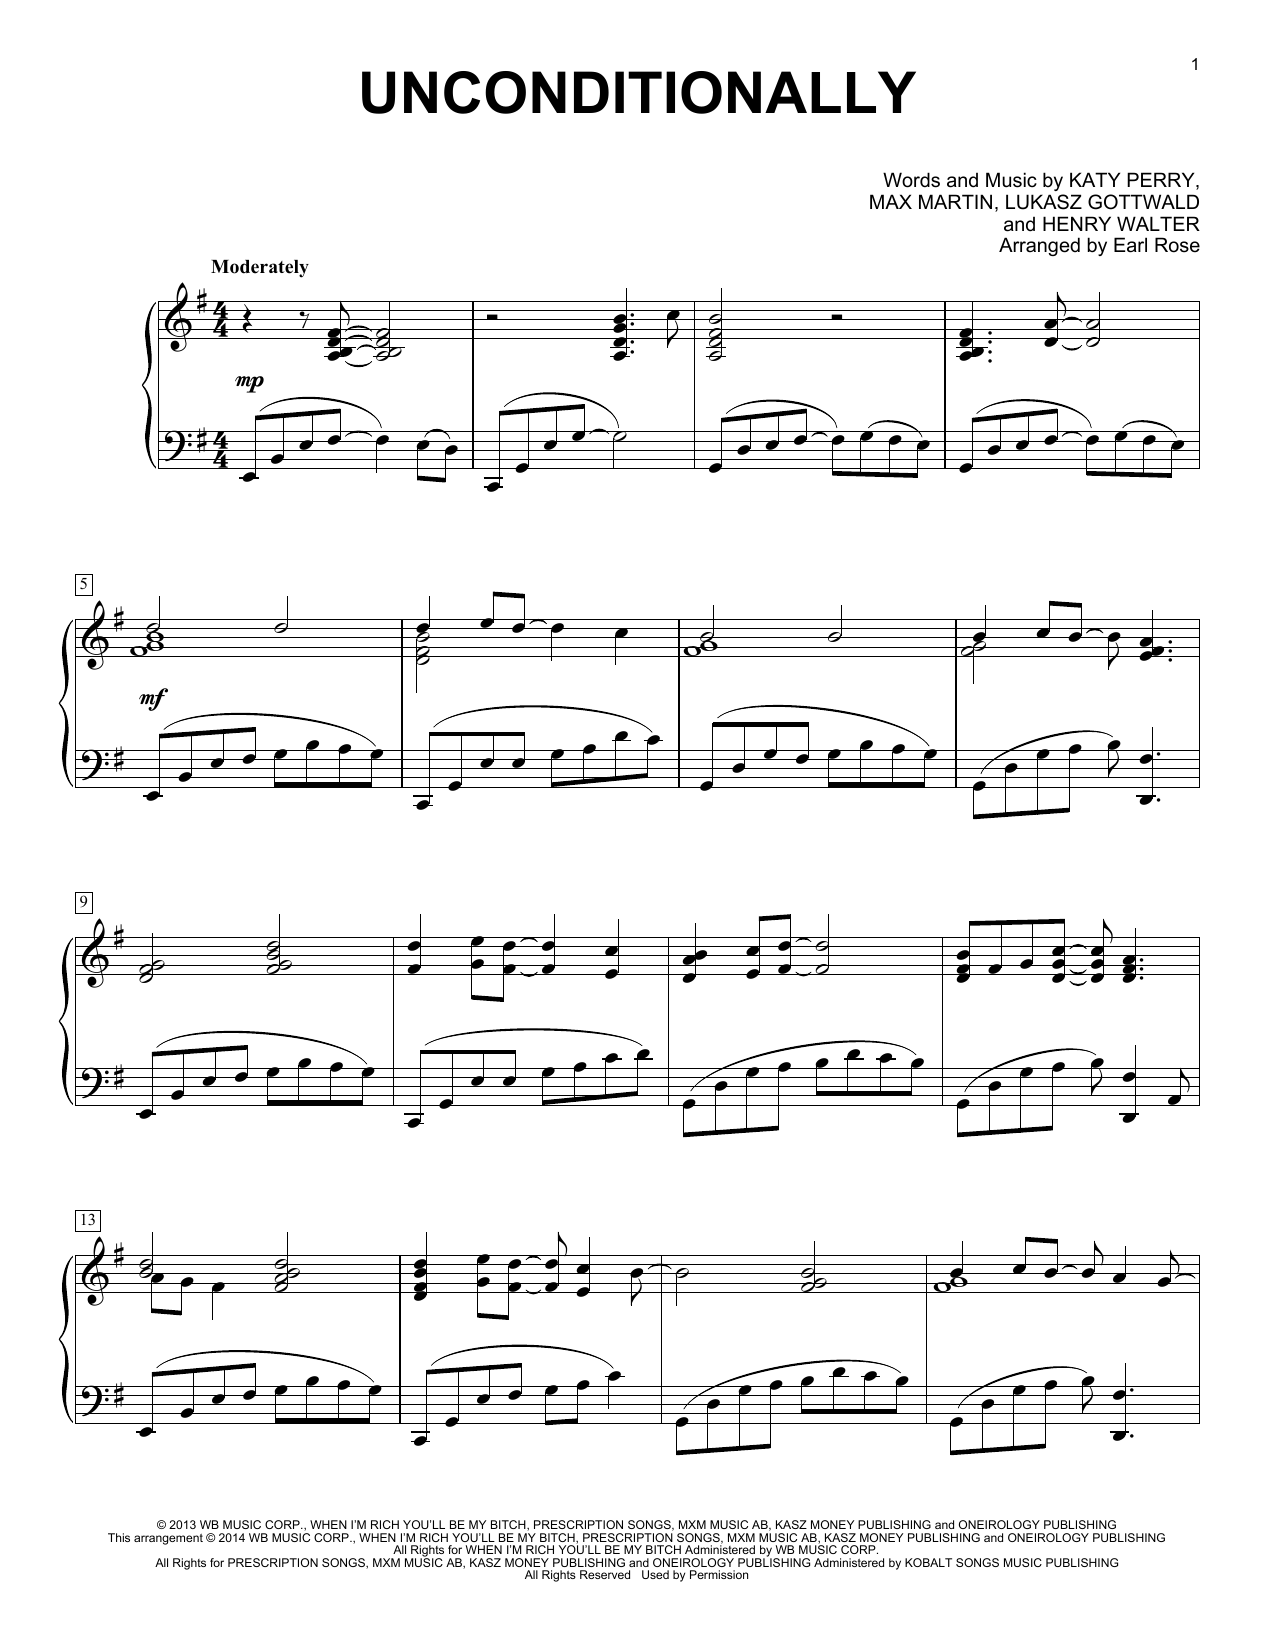 Download Earl Rose Unconditionally Sheet Music